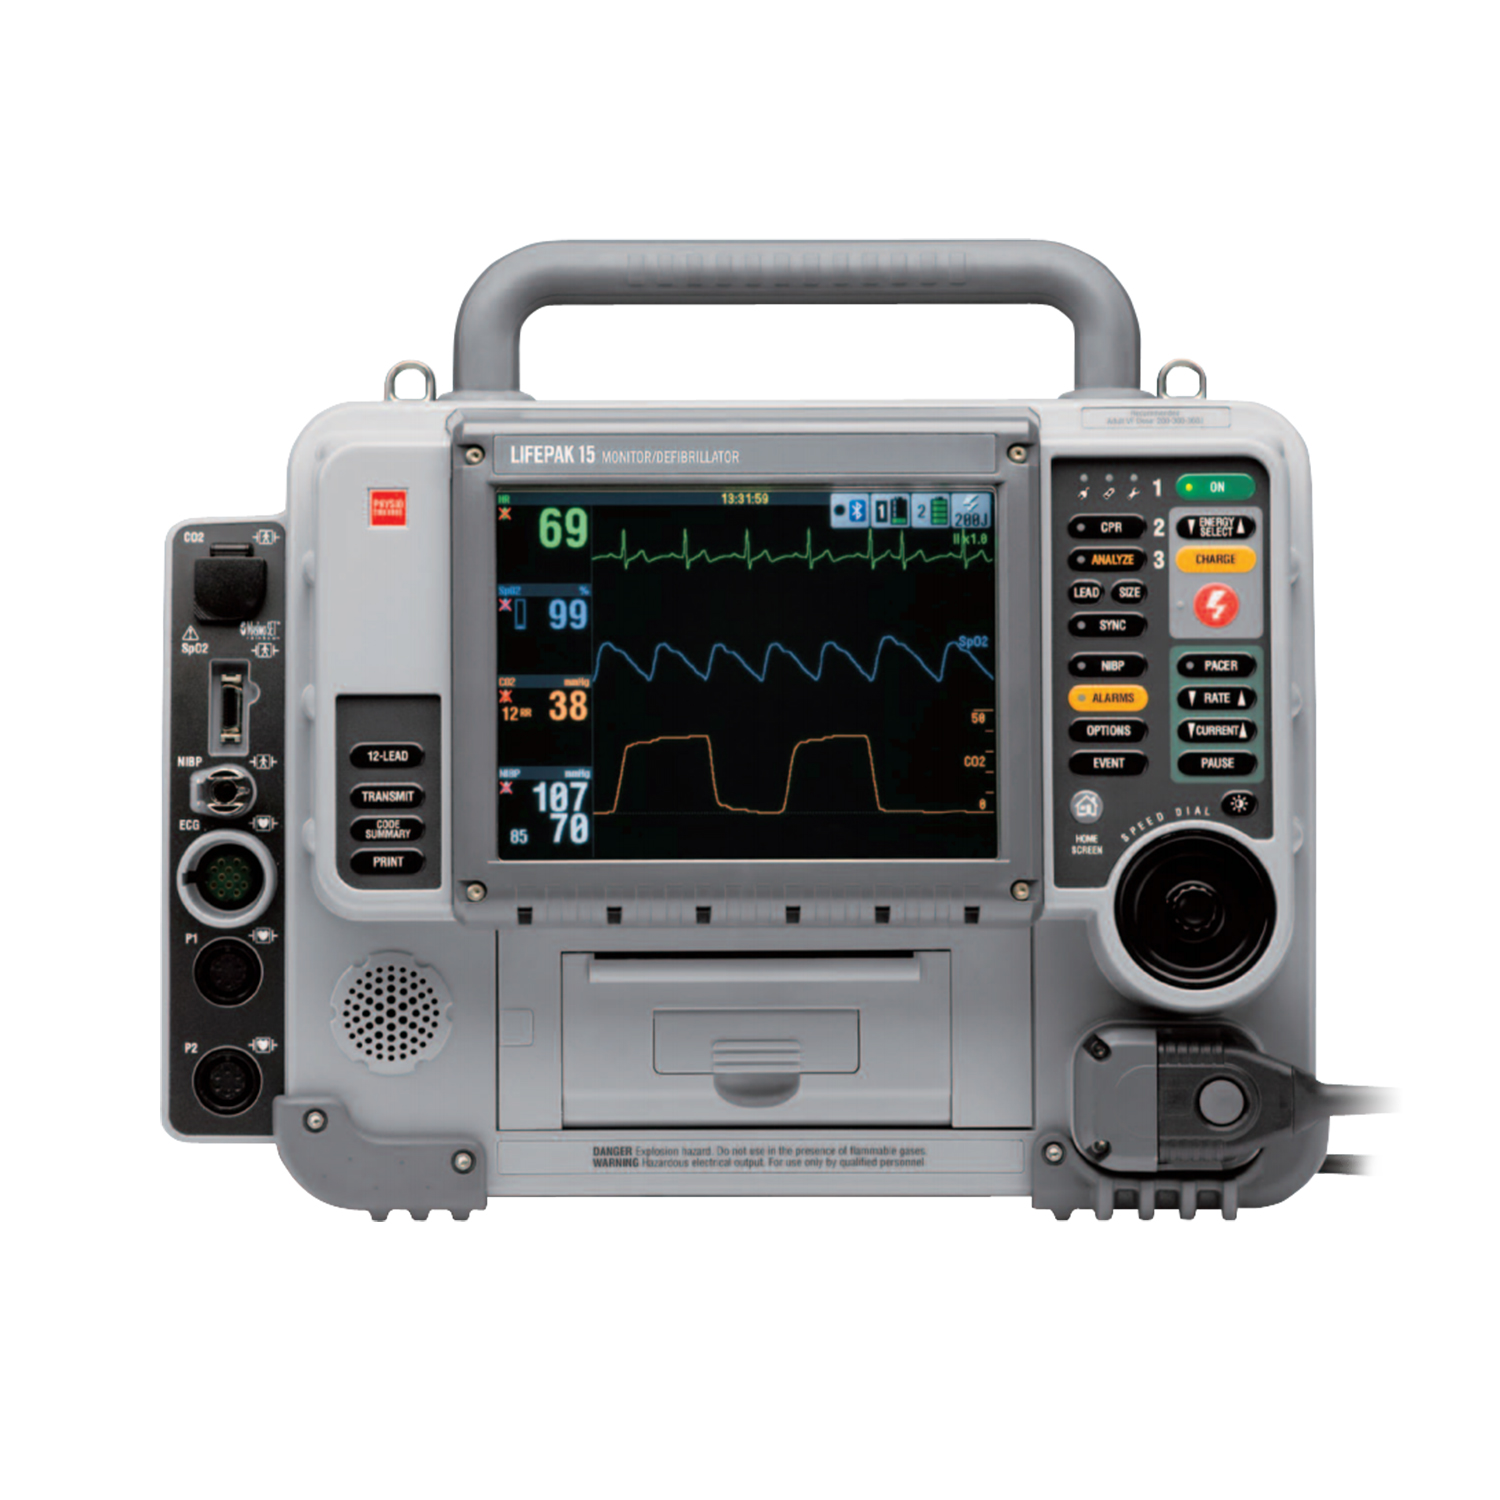 Lifepak Defibrillator From Medtronic Physio Control Planmedical | My ...